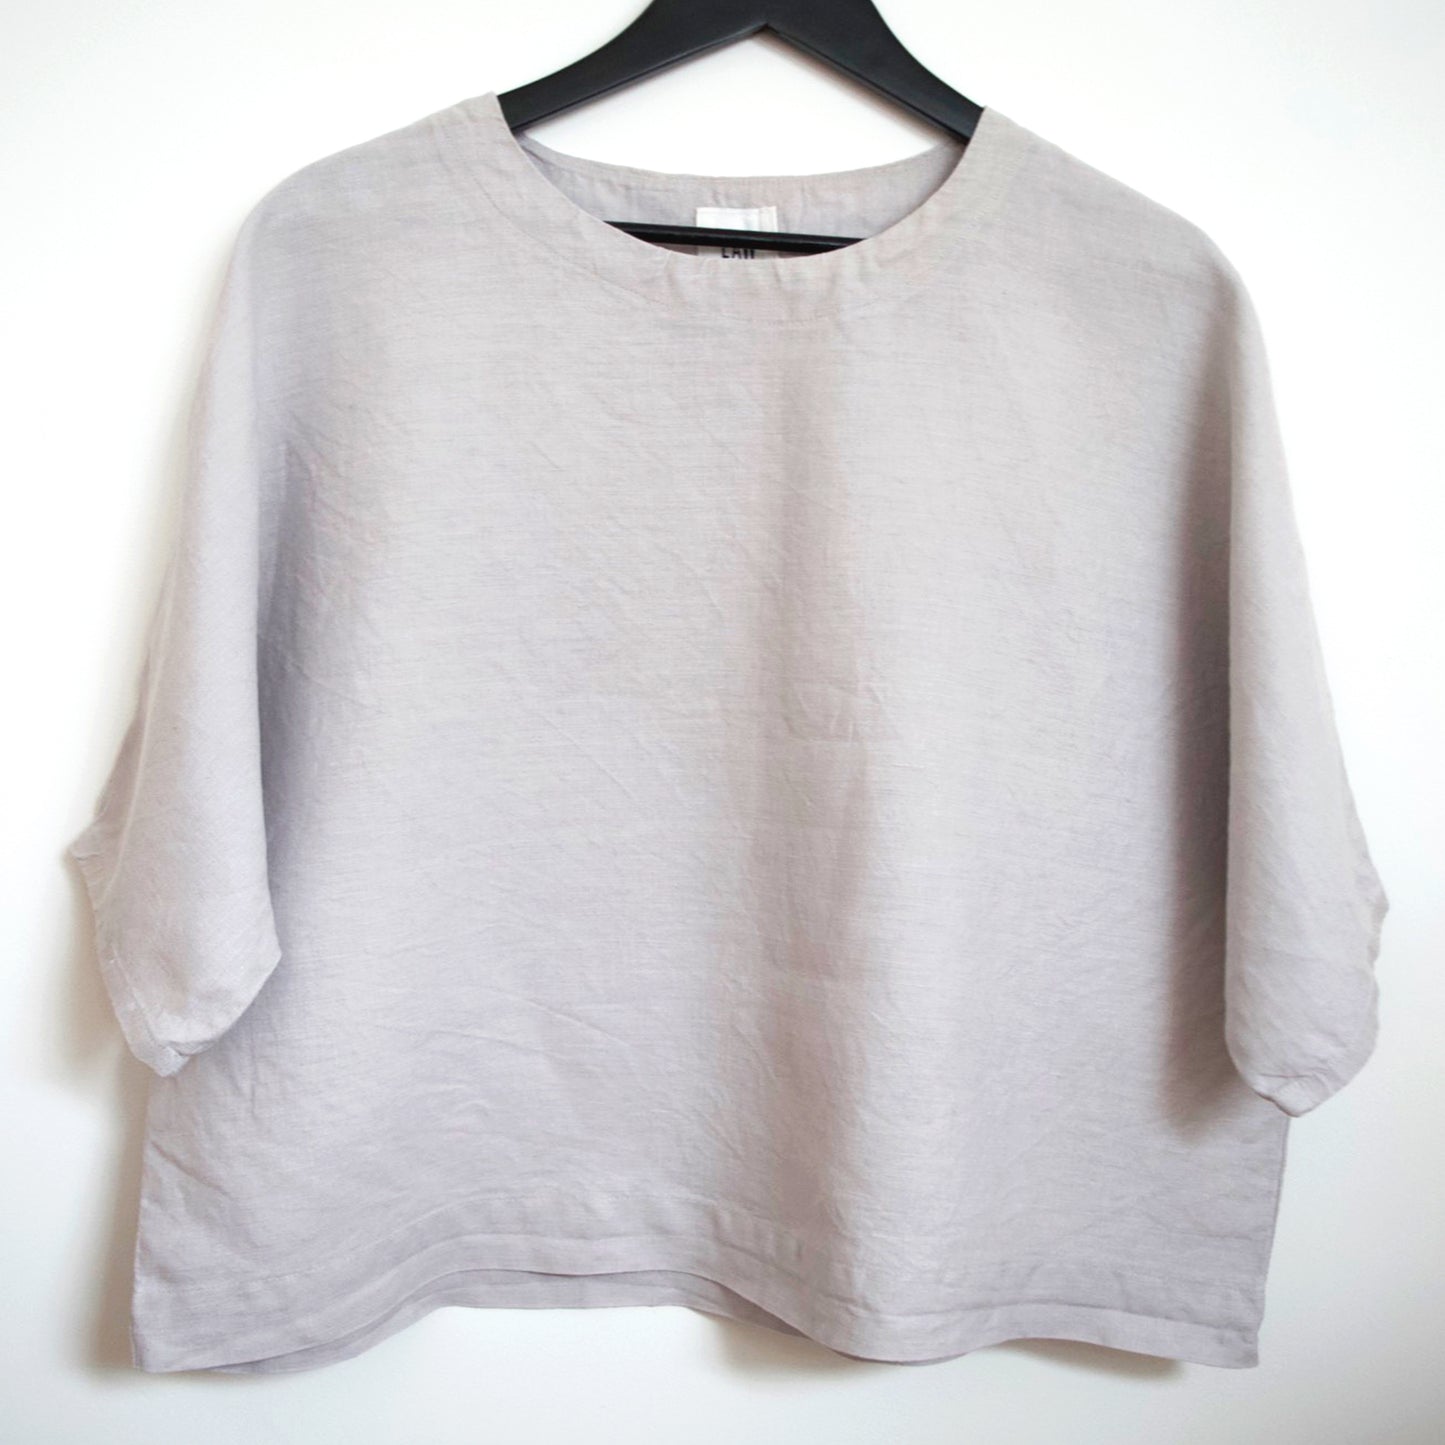 'Olivia' Oversized linen top size M | Pre-loved